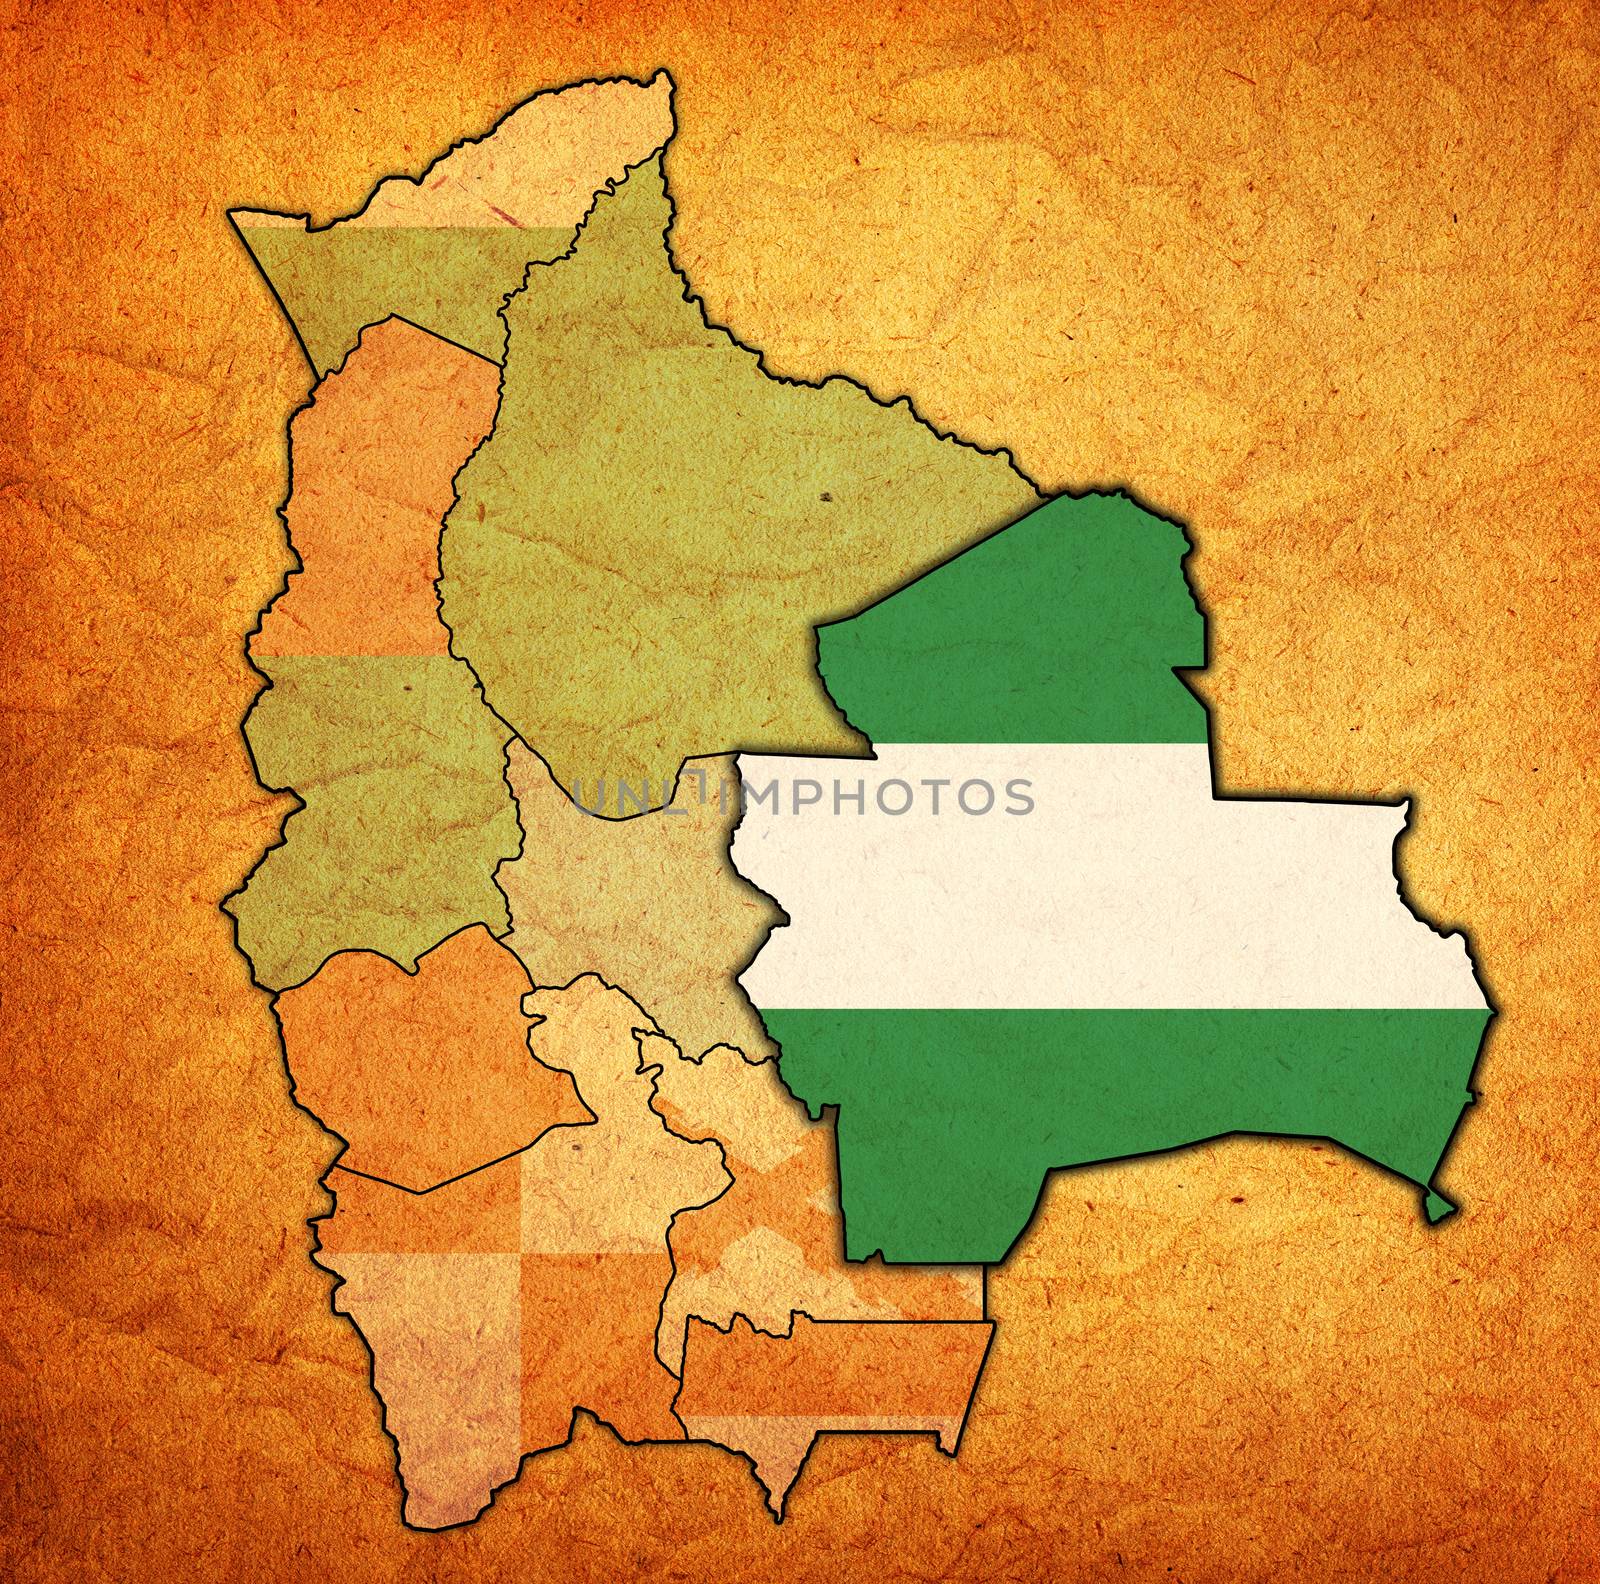 territory and flag of Santa Cruz region on map with administrative divisions and borders of Bolivia with clipping path